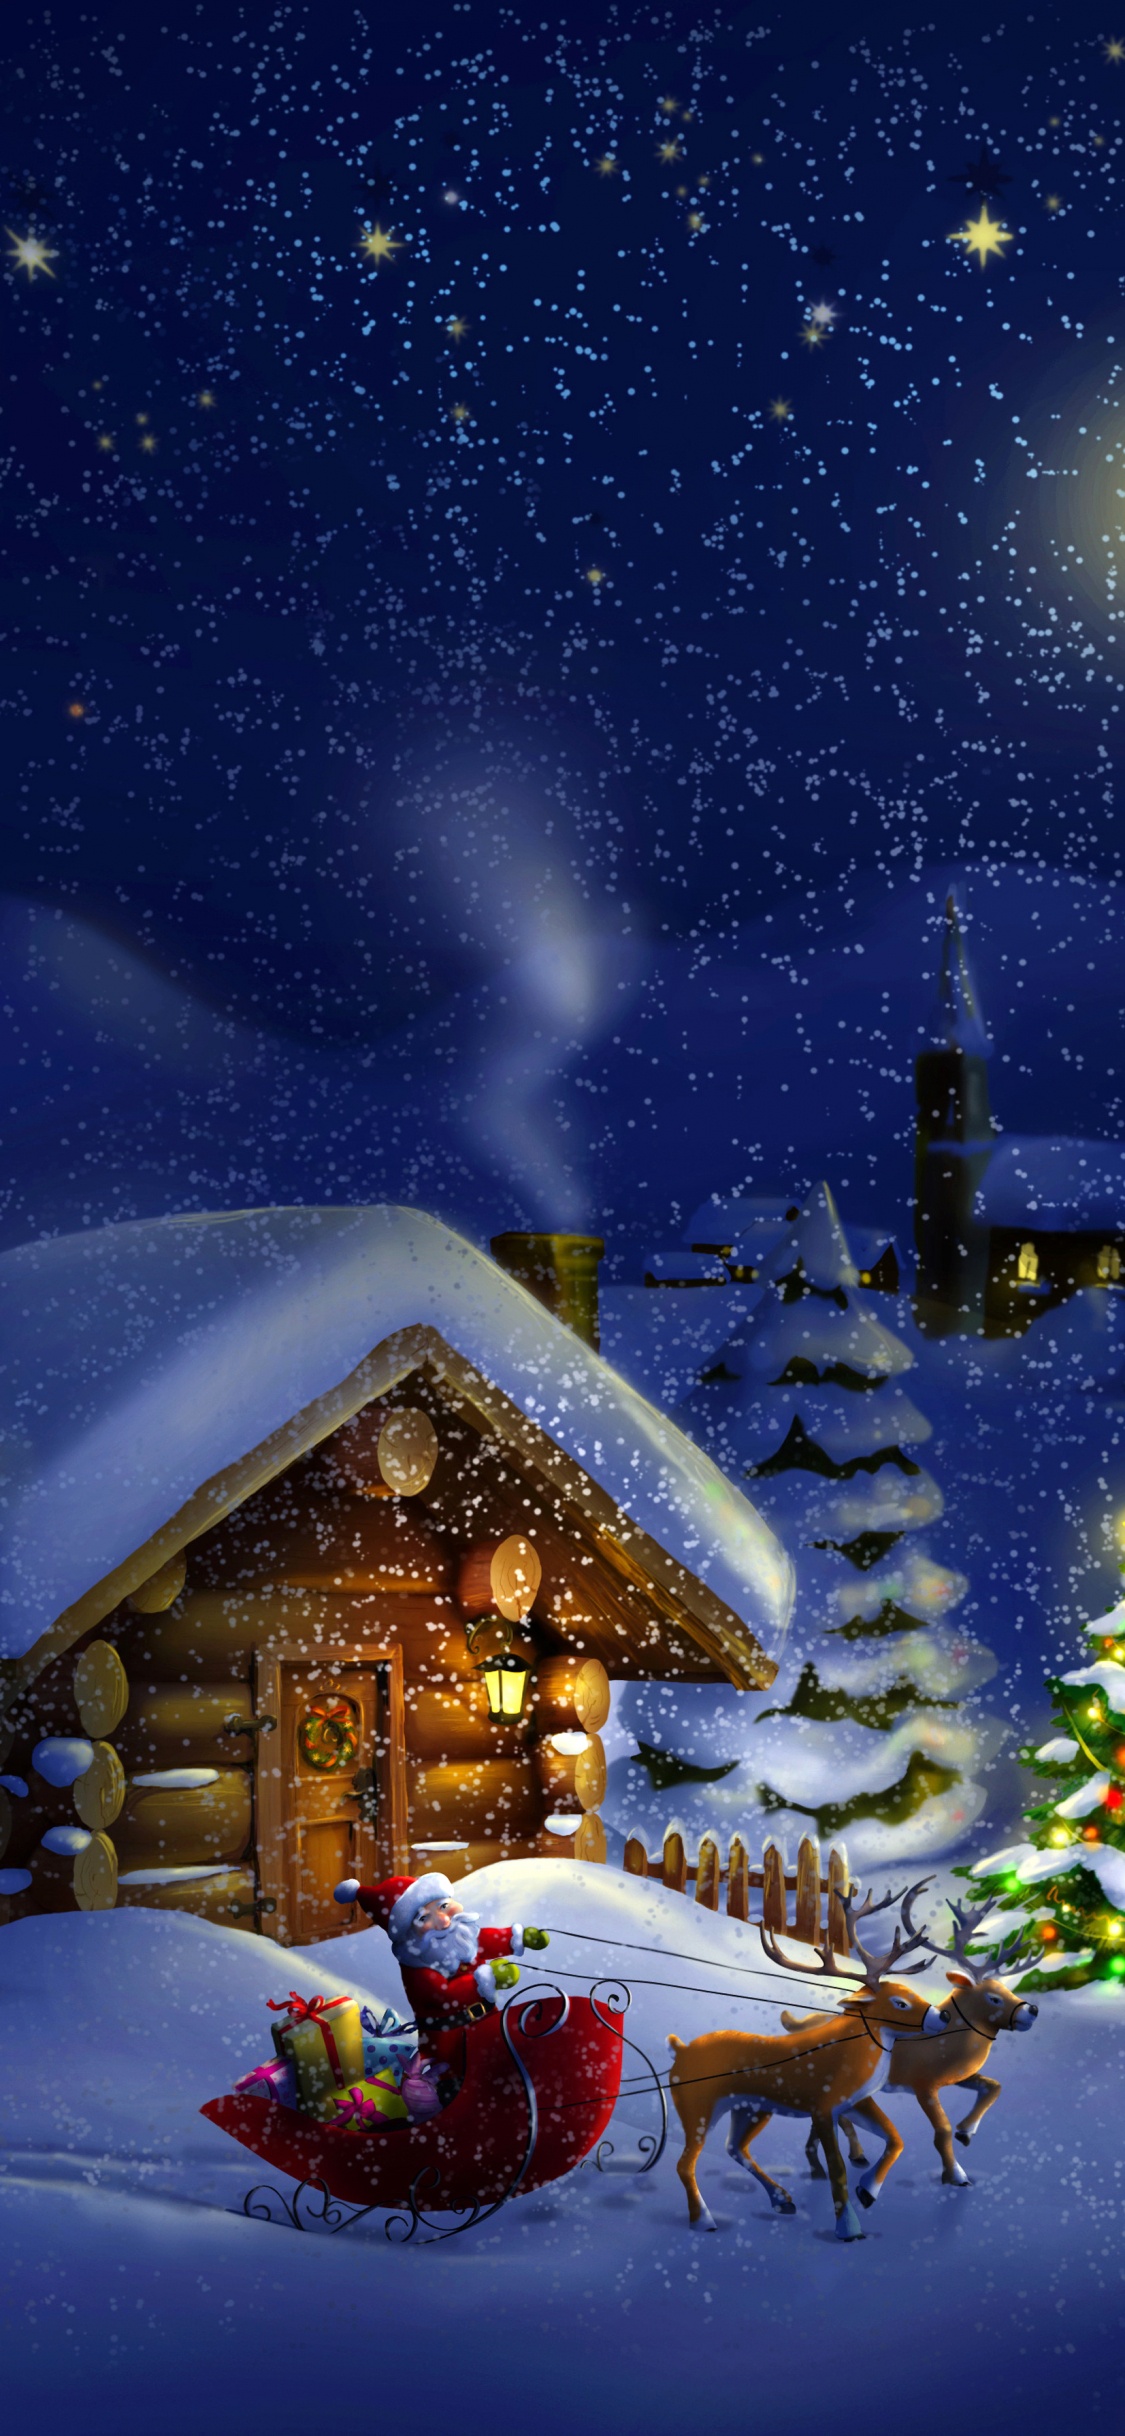 Christmas Day, Santa Claus, Holiday, Winter, Snow. Wallpaper in 1125x2436 Resolution